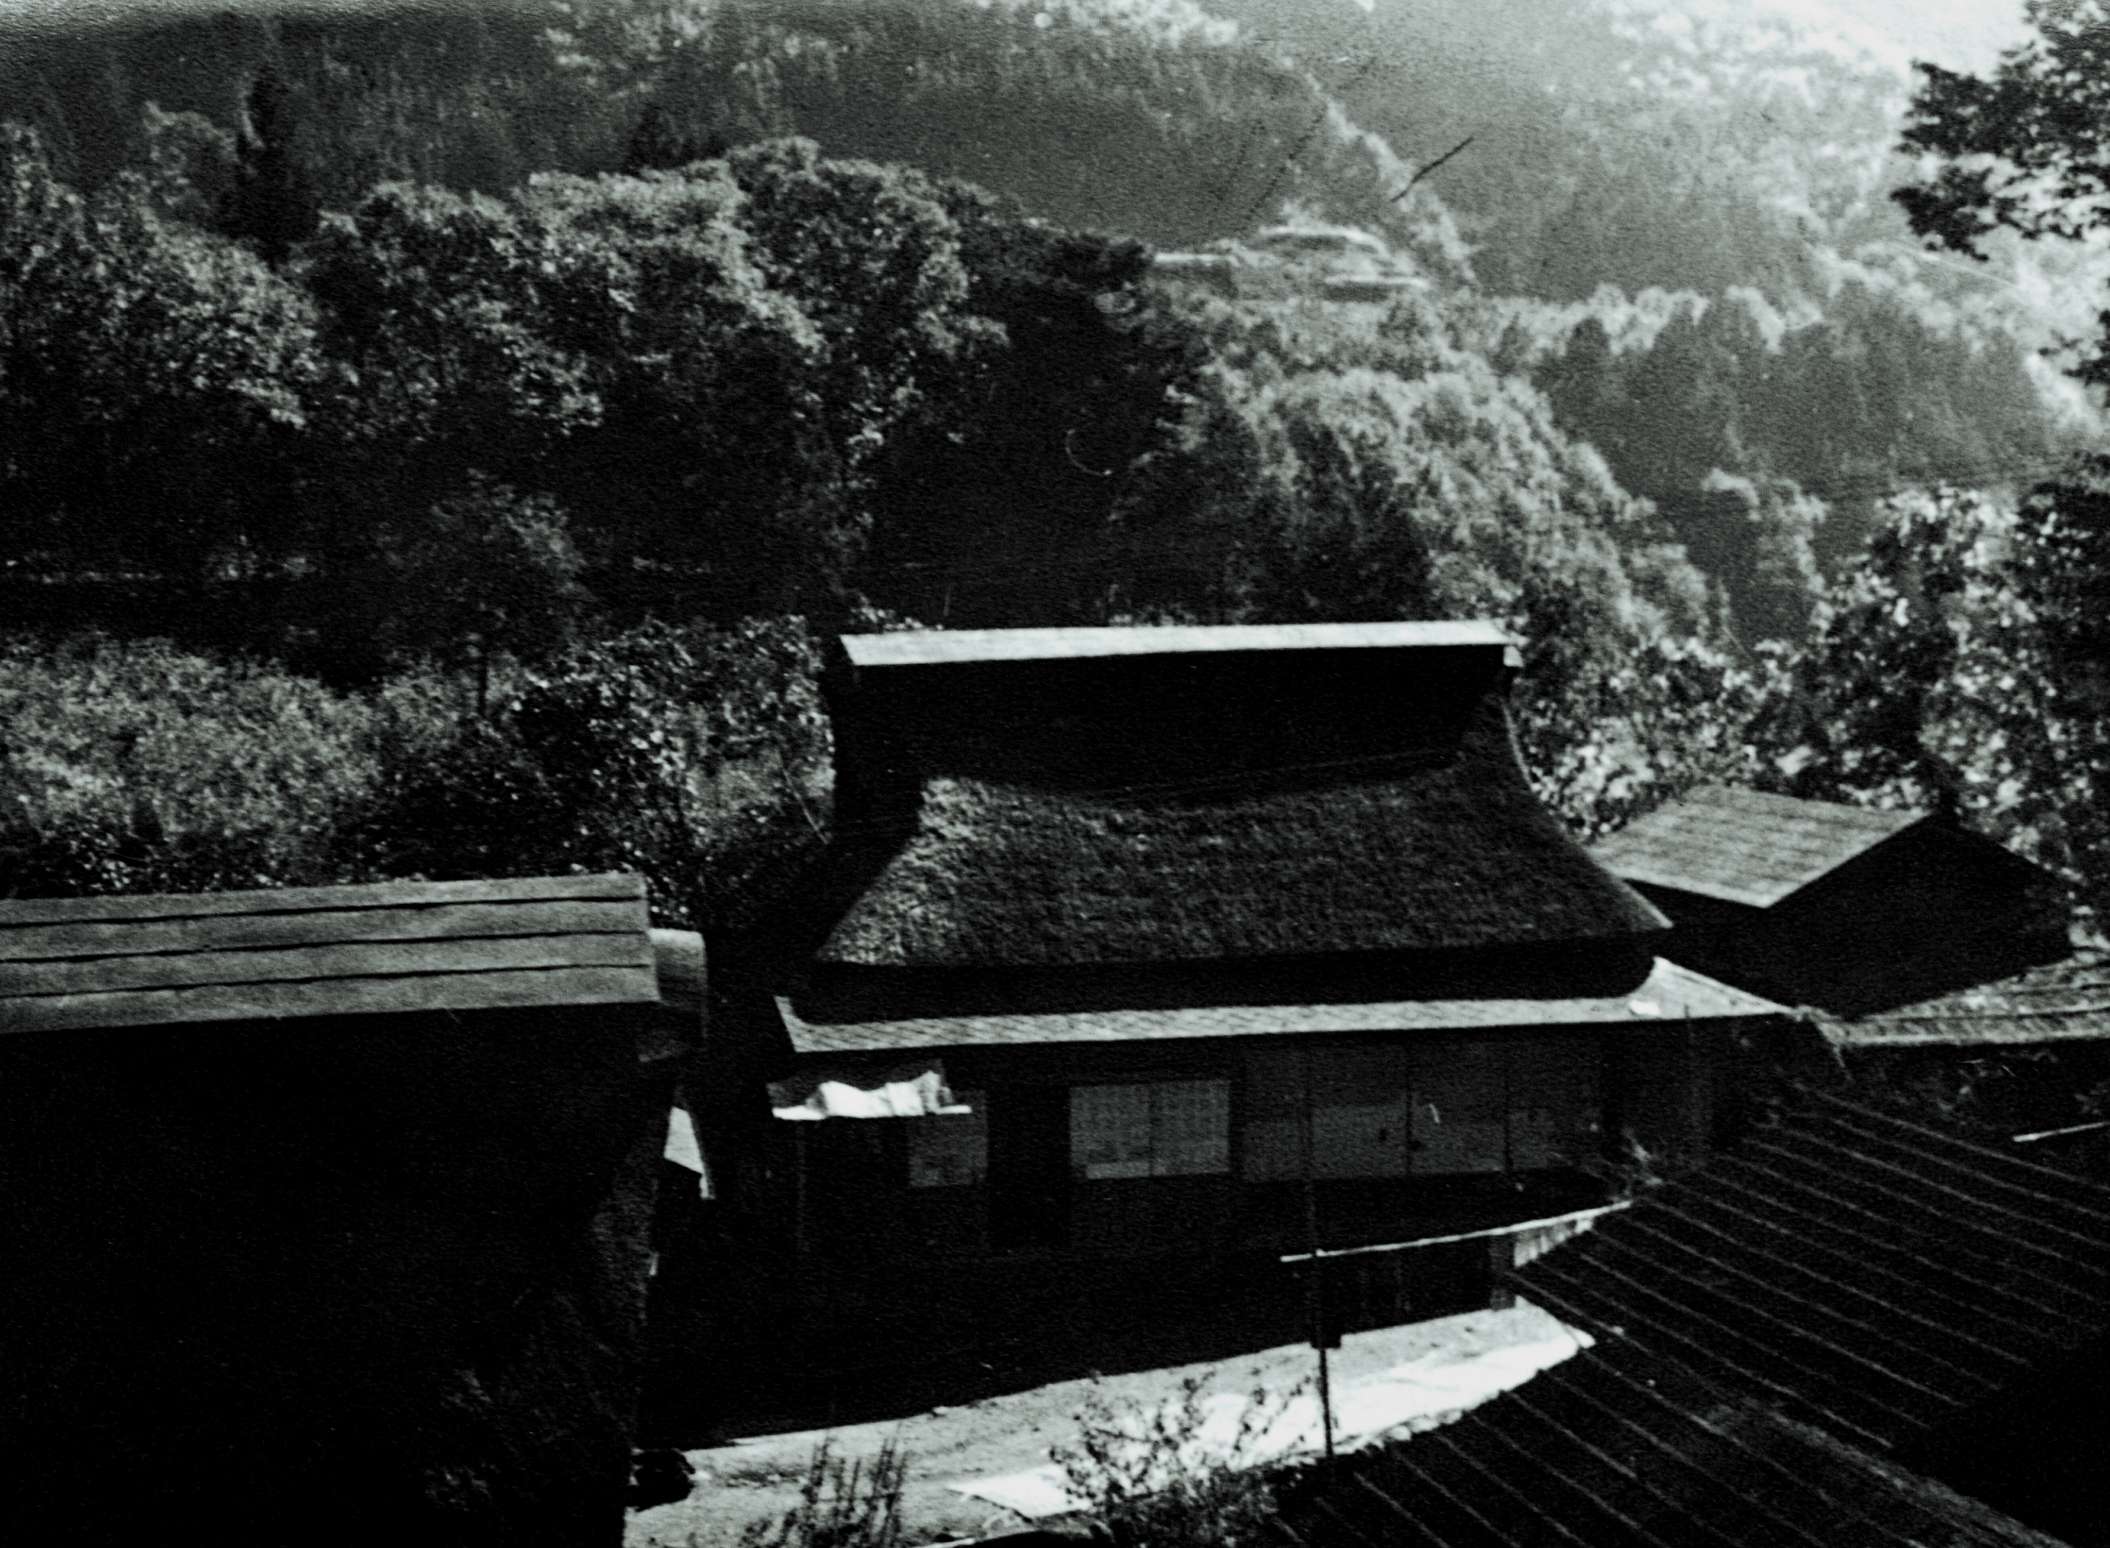 A black and white photo of an idyllic Japanese village, with a large thatched roof house in the center; early morning sunlight casts shadows and bathes distant mountain groves in a haze of light.